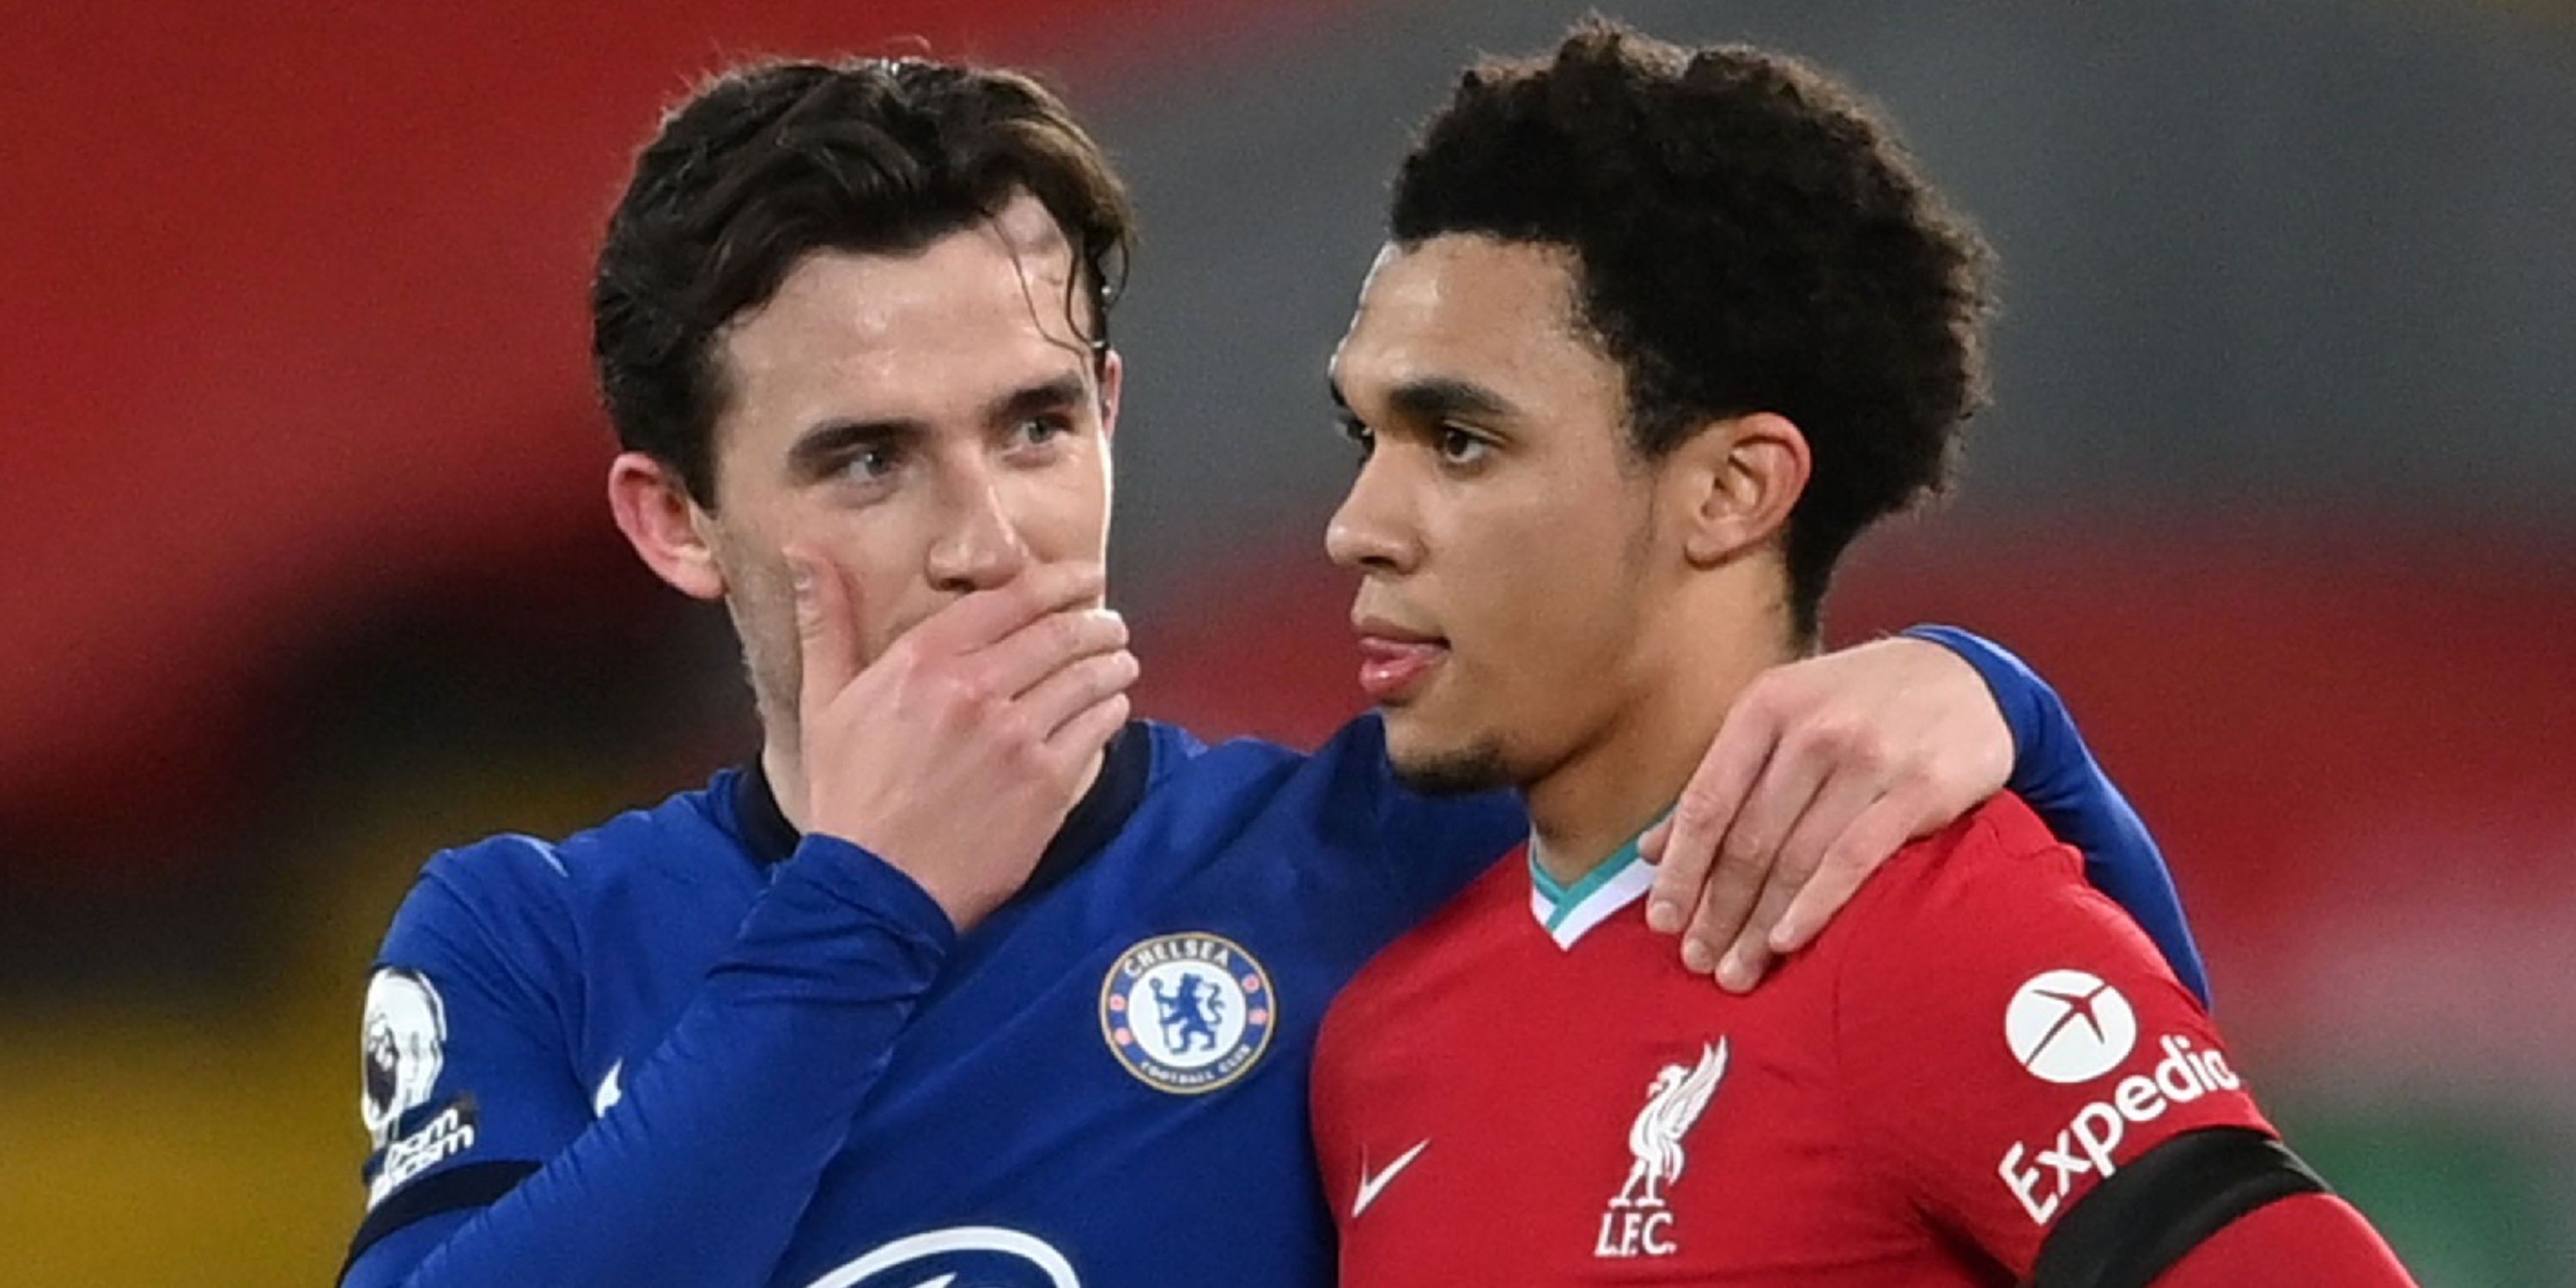 Ben Chilwell and Trent Alexander-Arnold